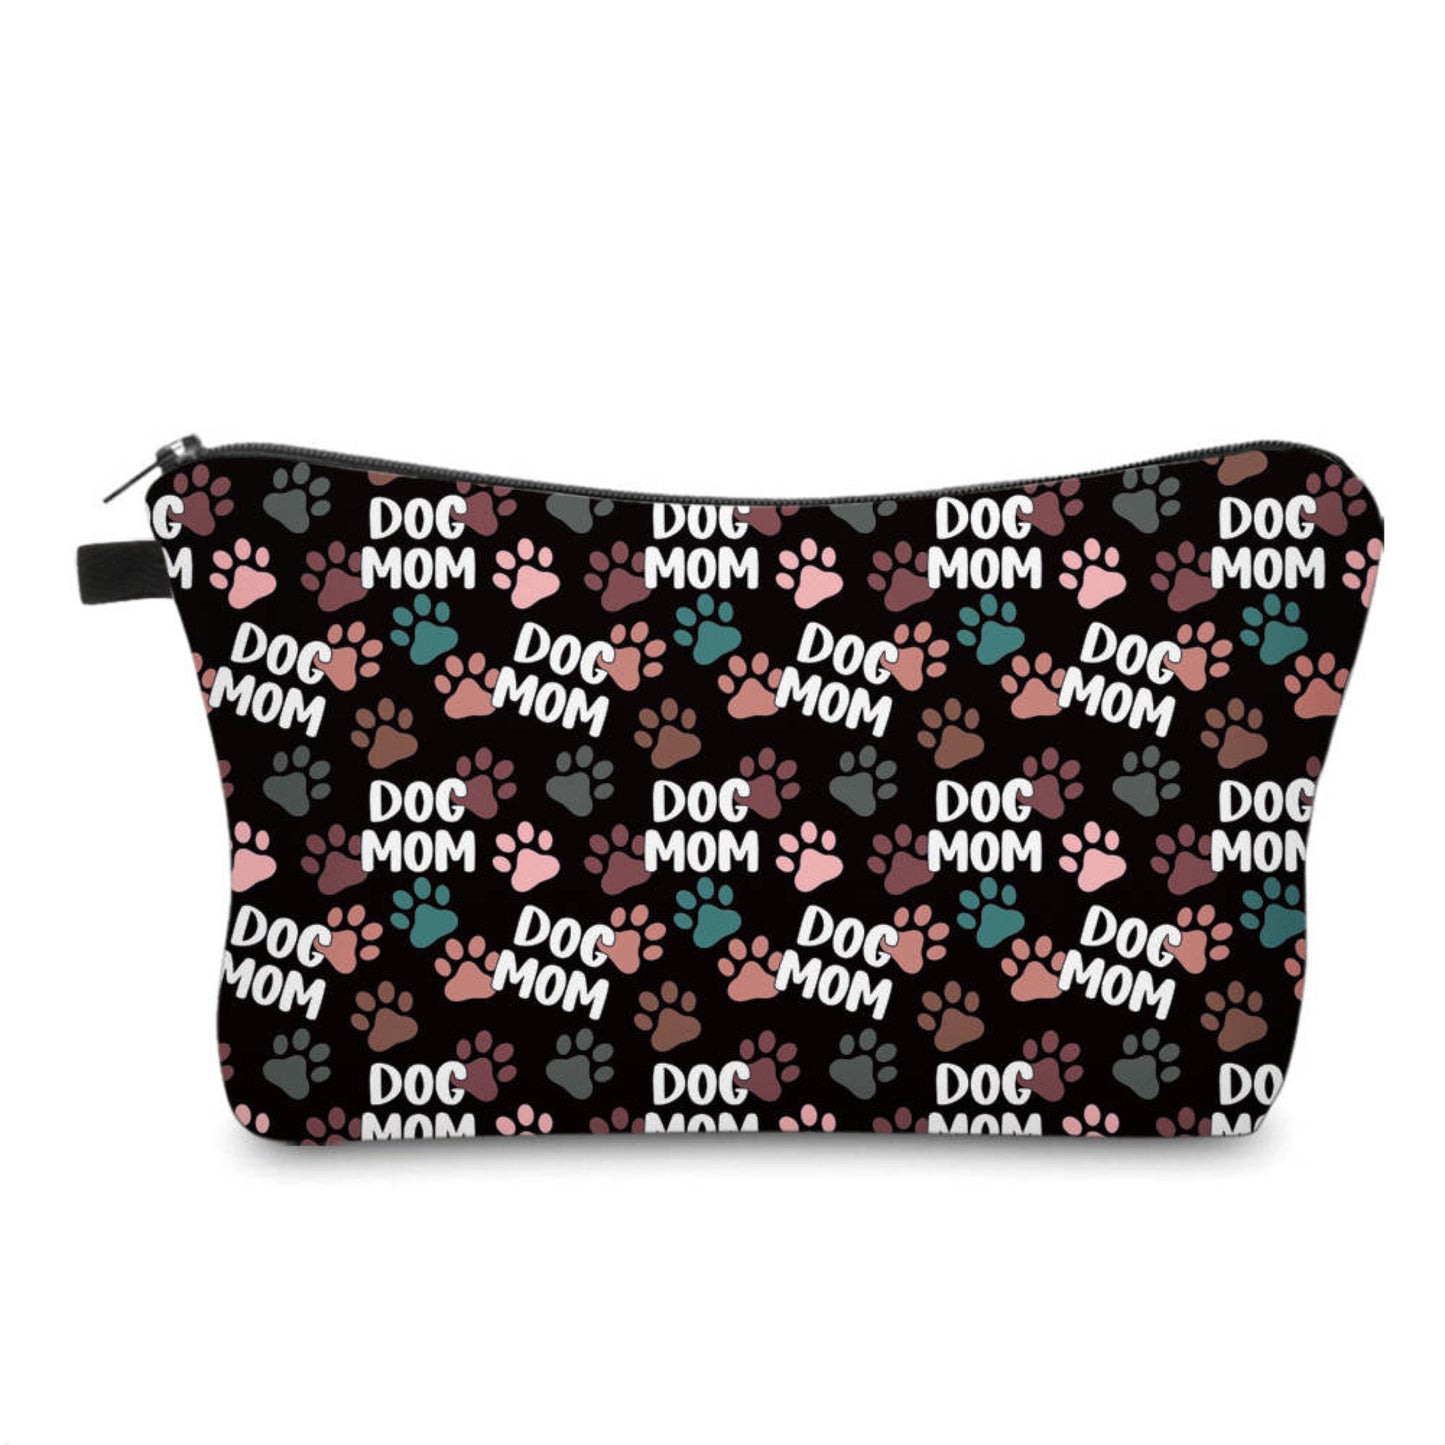 Dog Mom All Over Design - Water-Resistant Multi-Use Pouch